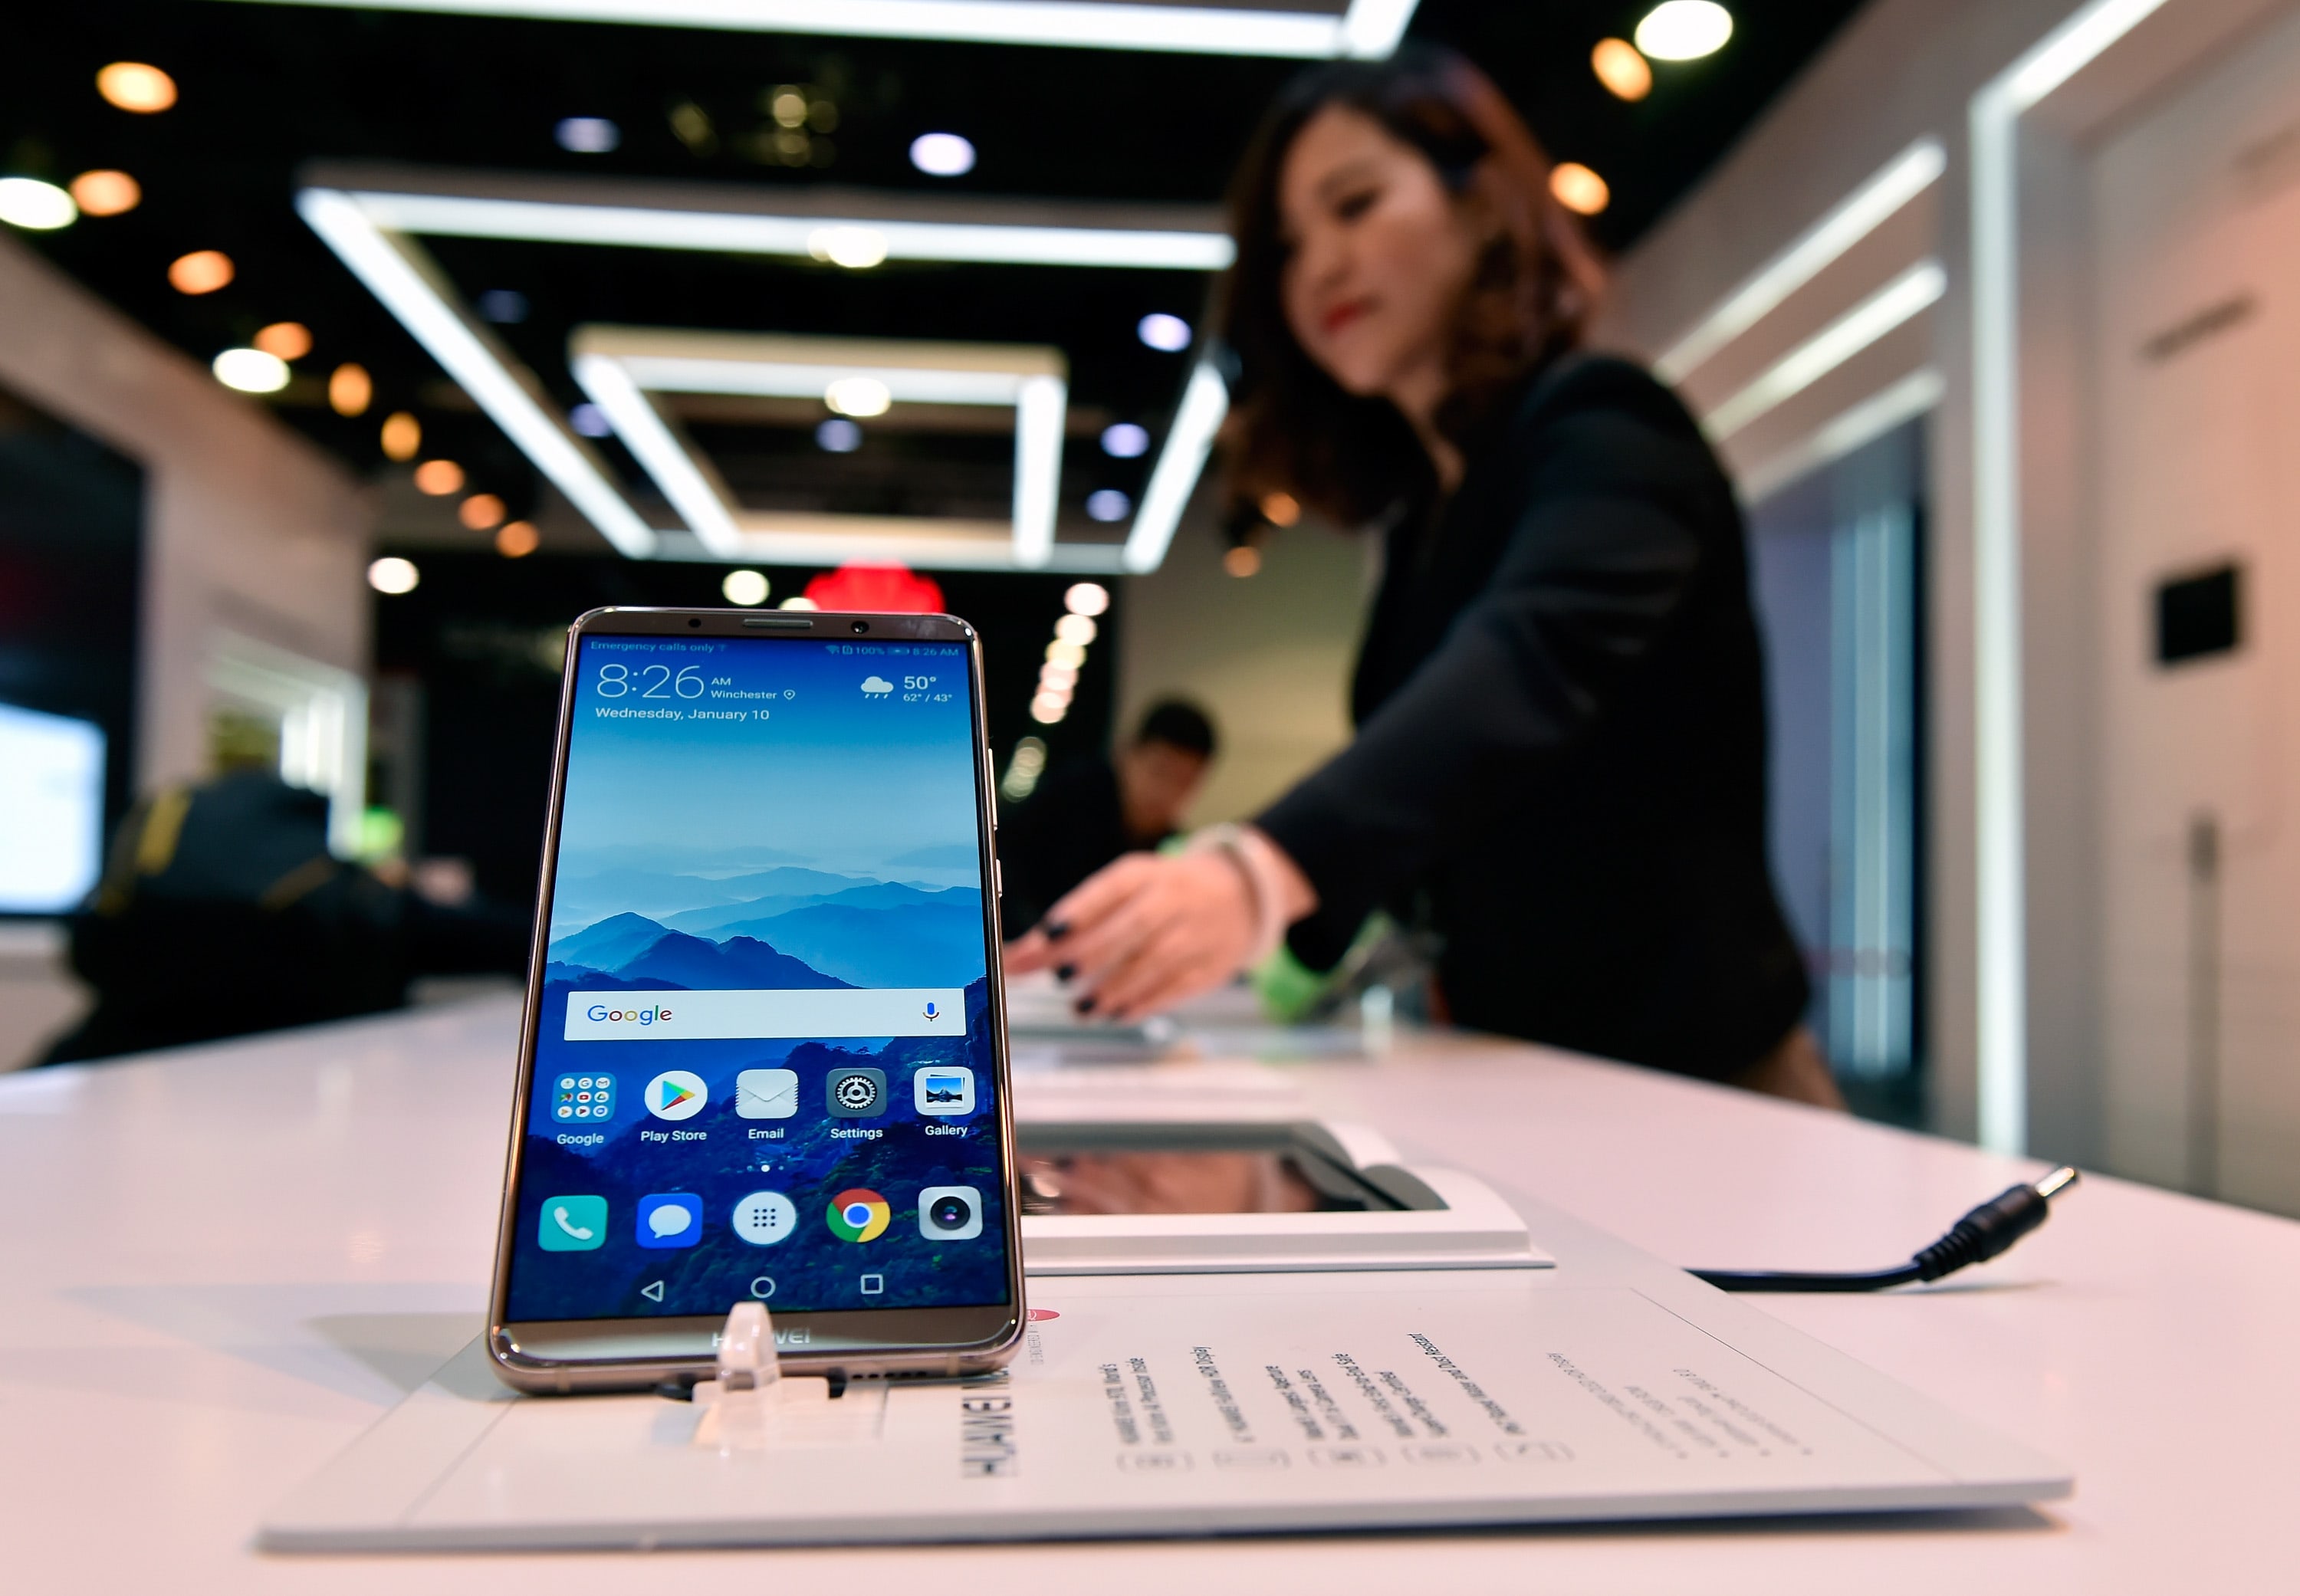 Huawei Mate 10 Pro at CES 2018